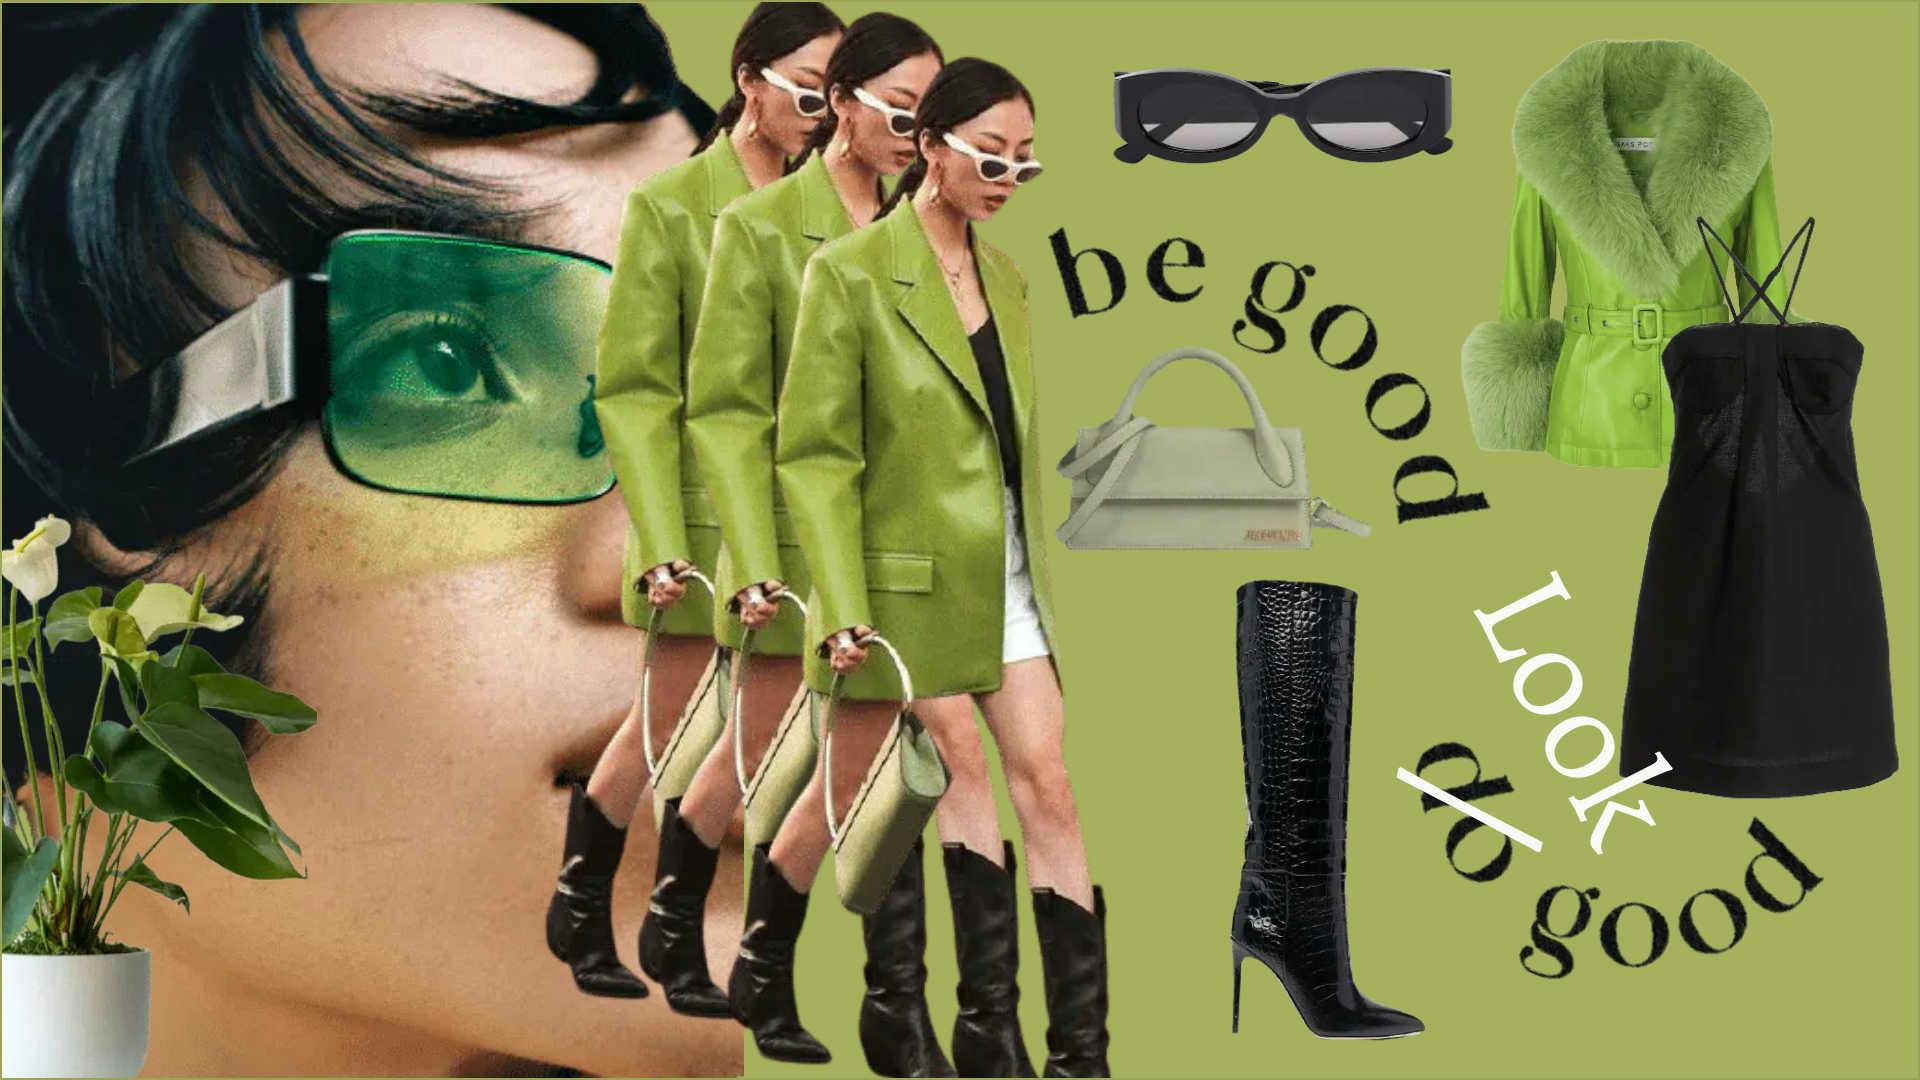 Be good, Look good. Fashion inspired ¡REMIX!